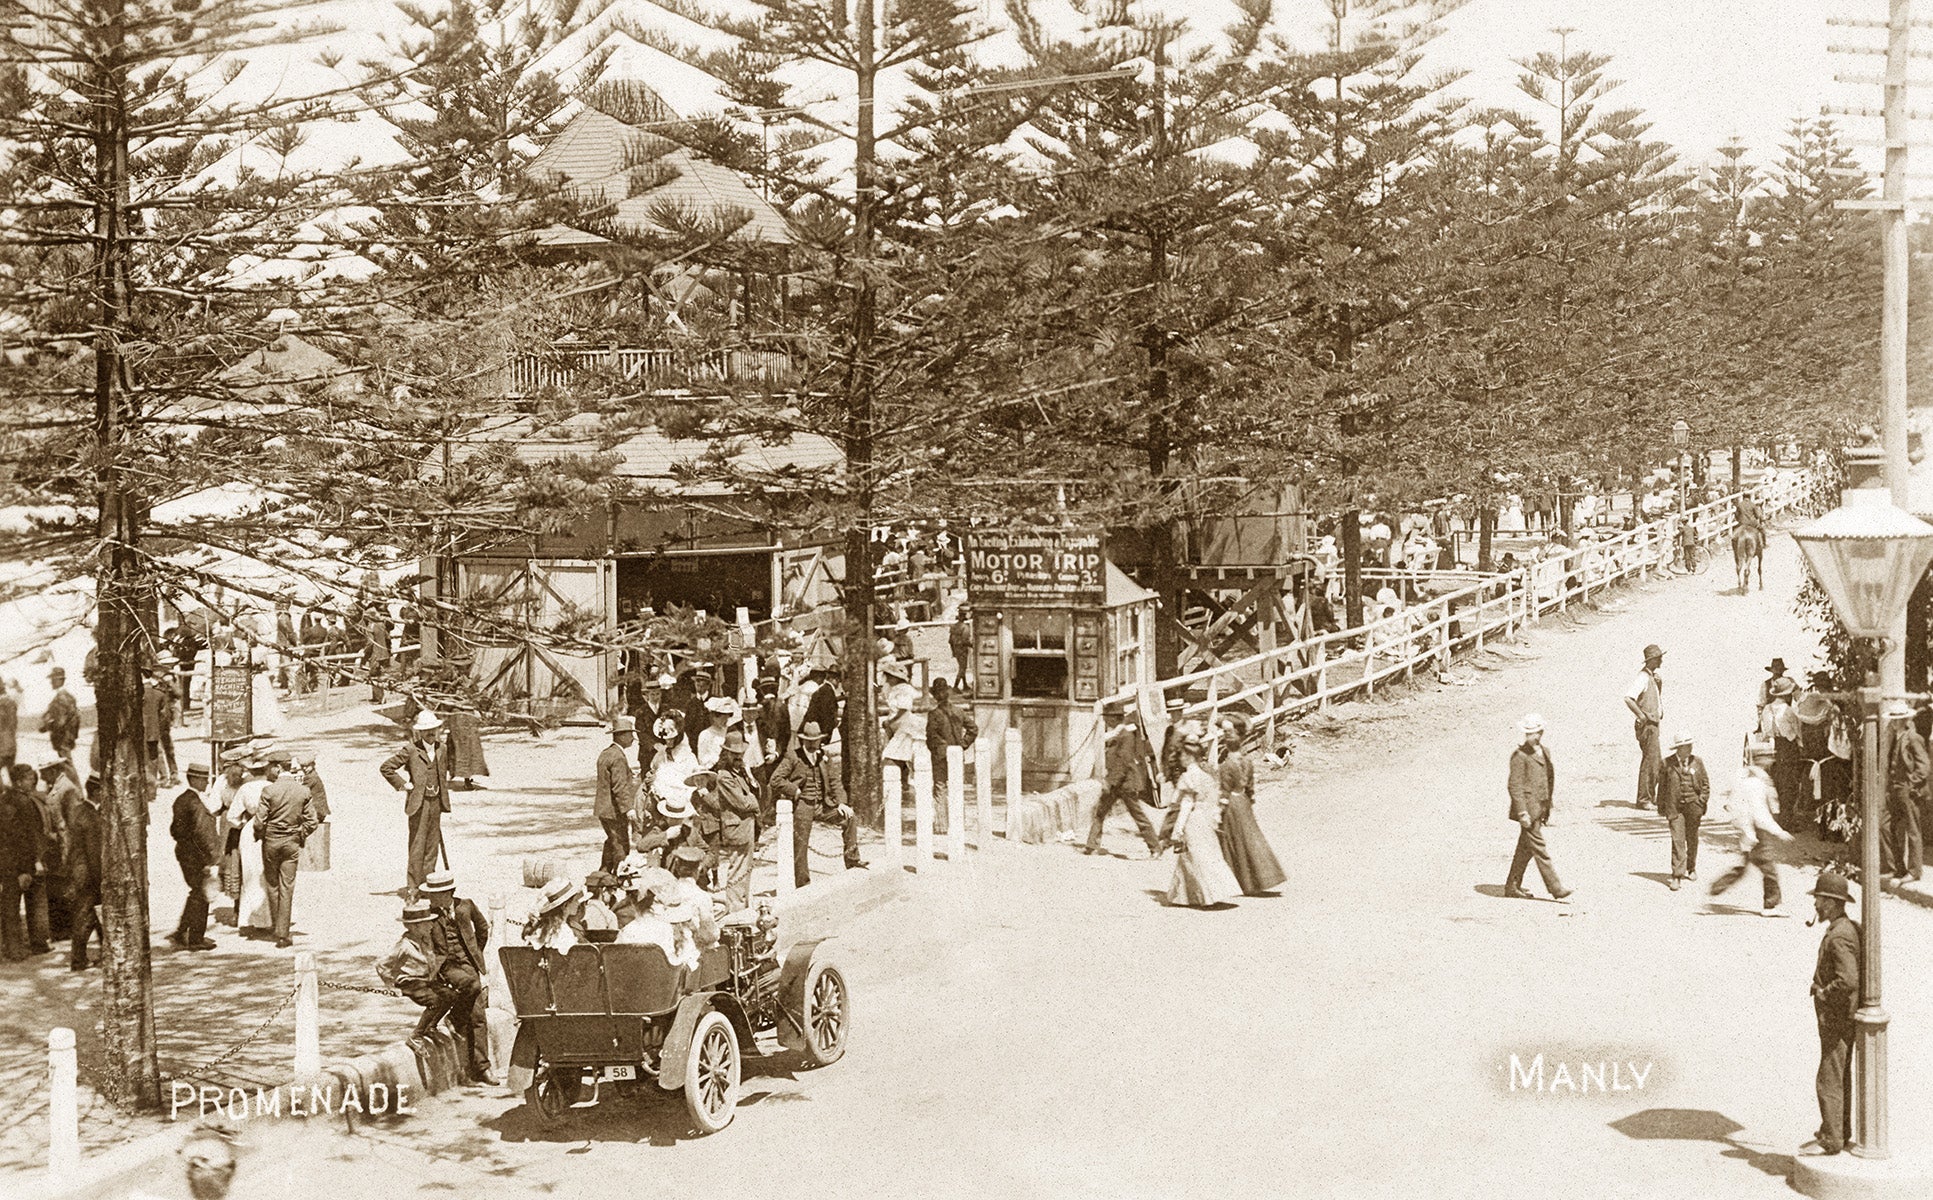 Corner Of The Corso And South Steyne, Manly NSW Australia 1909